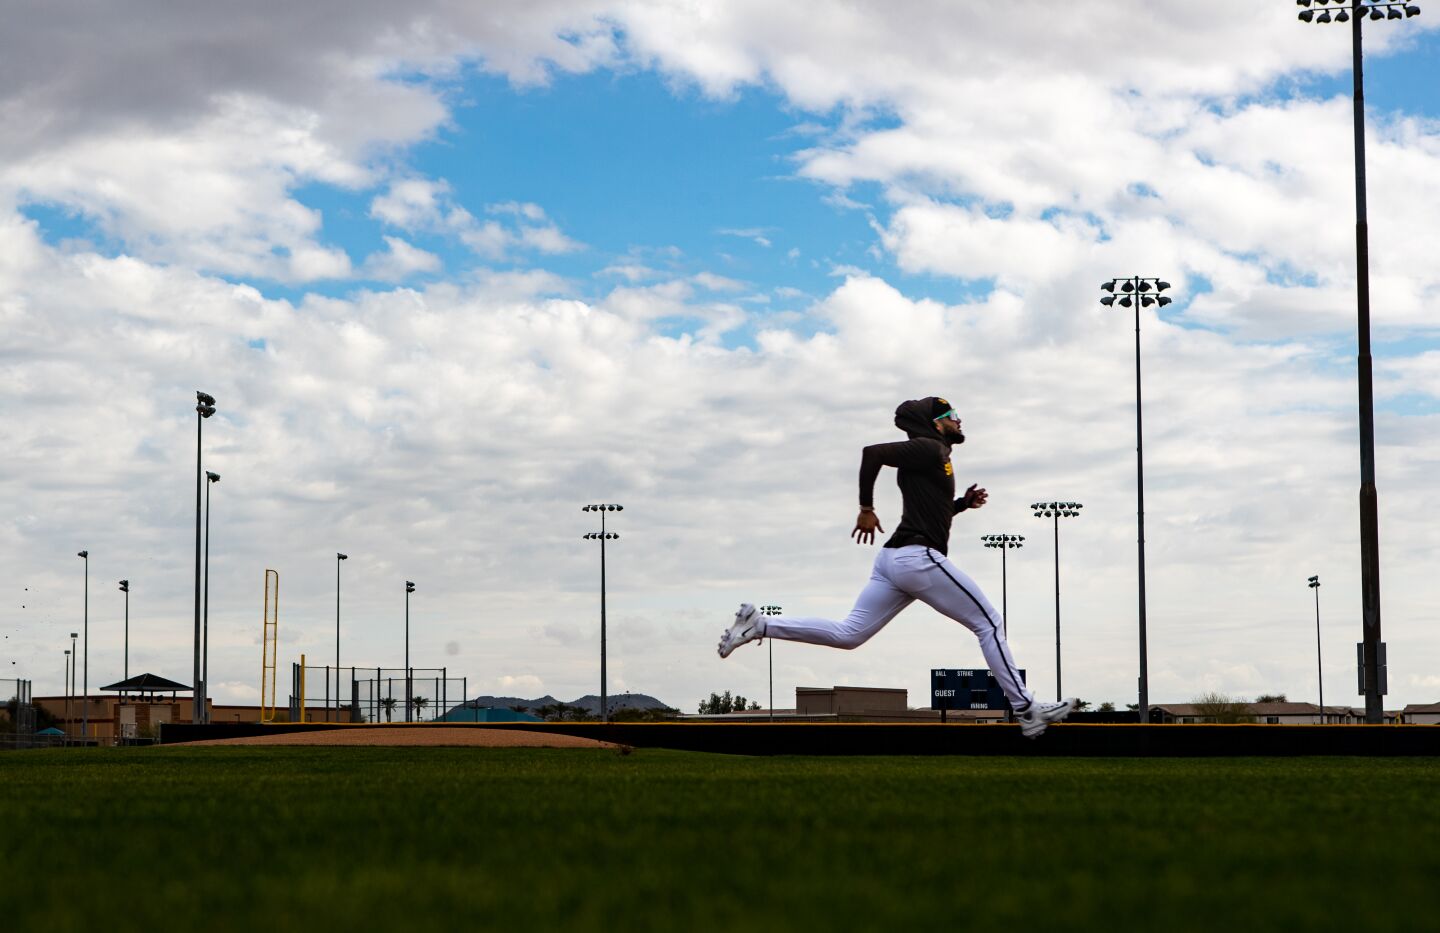 Padres shortstop and outfielder Fernando Tatis Jr. (23) runs the bases during a spring training practice at the Peoria Sports Complex on Tuesday, Feb. 21, 2023 in Peoria, AZ.